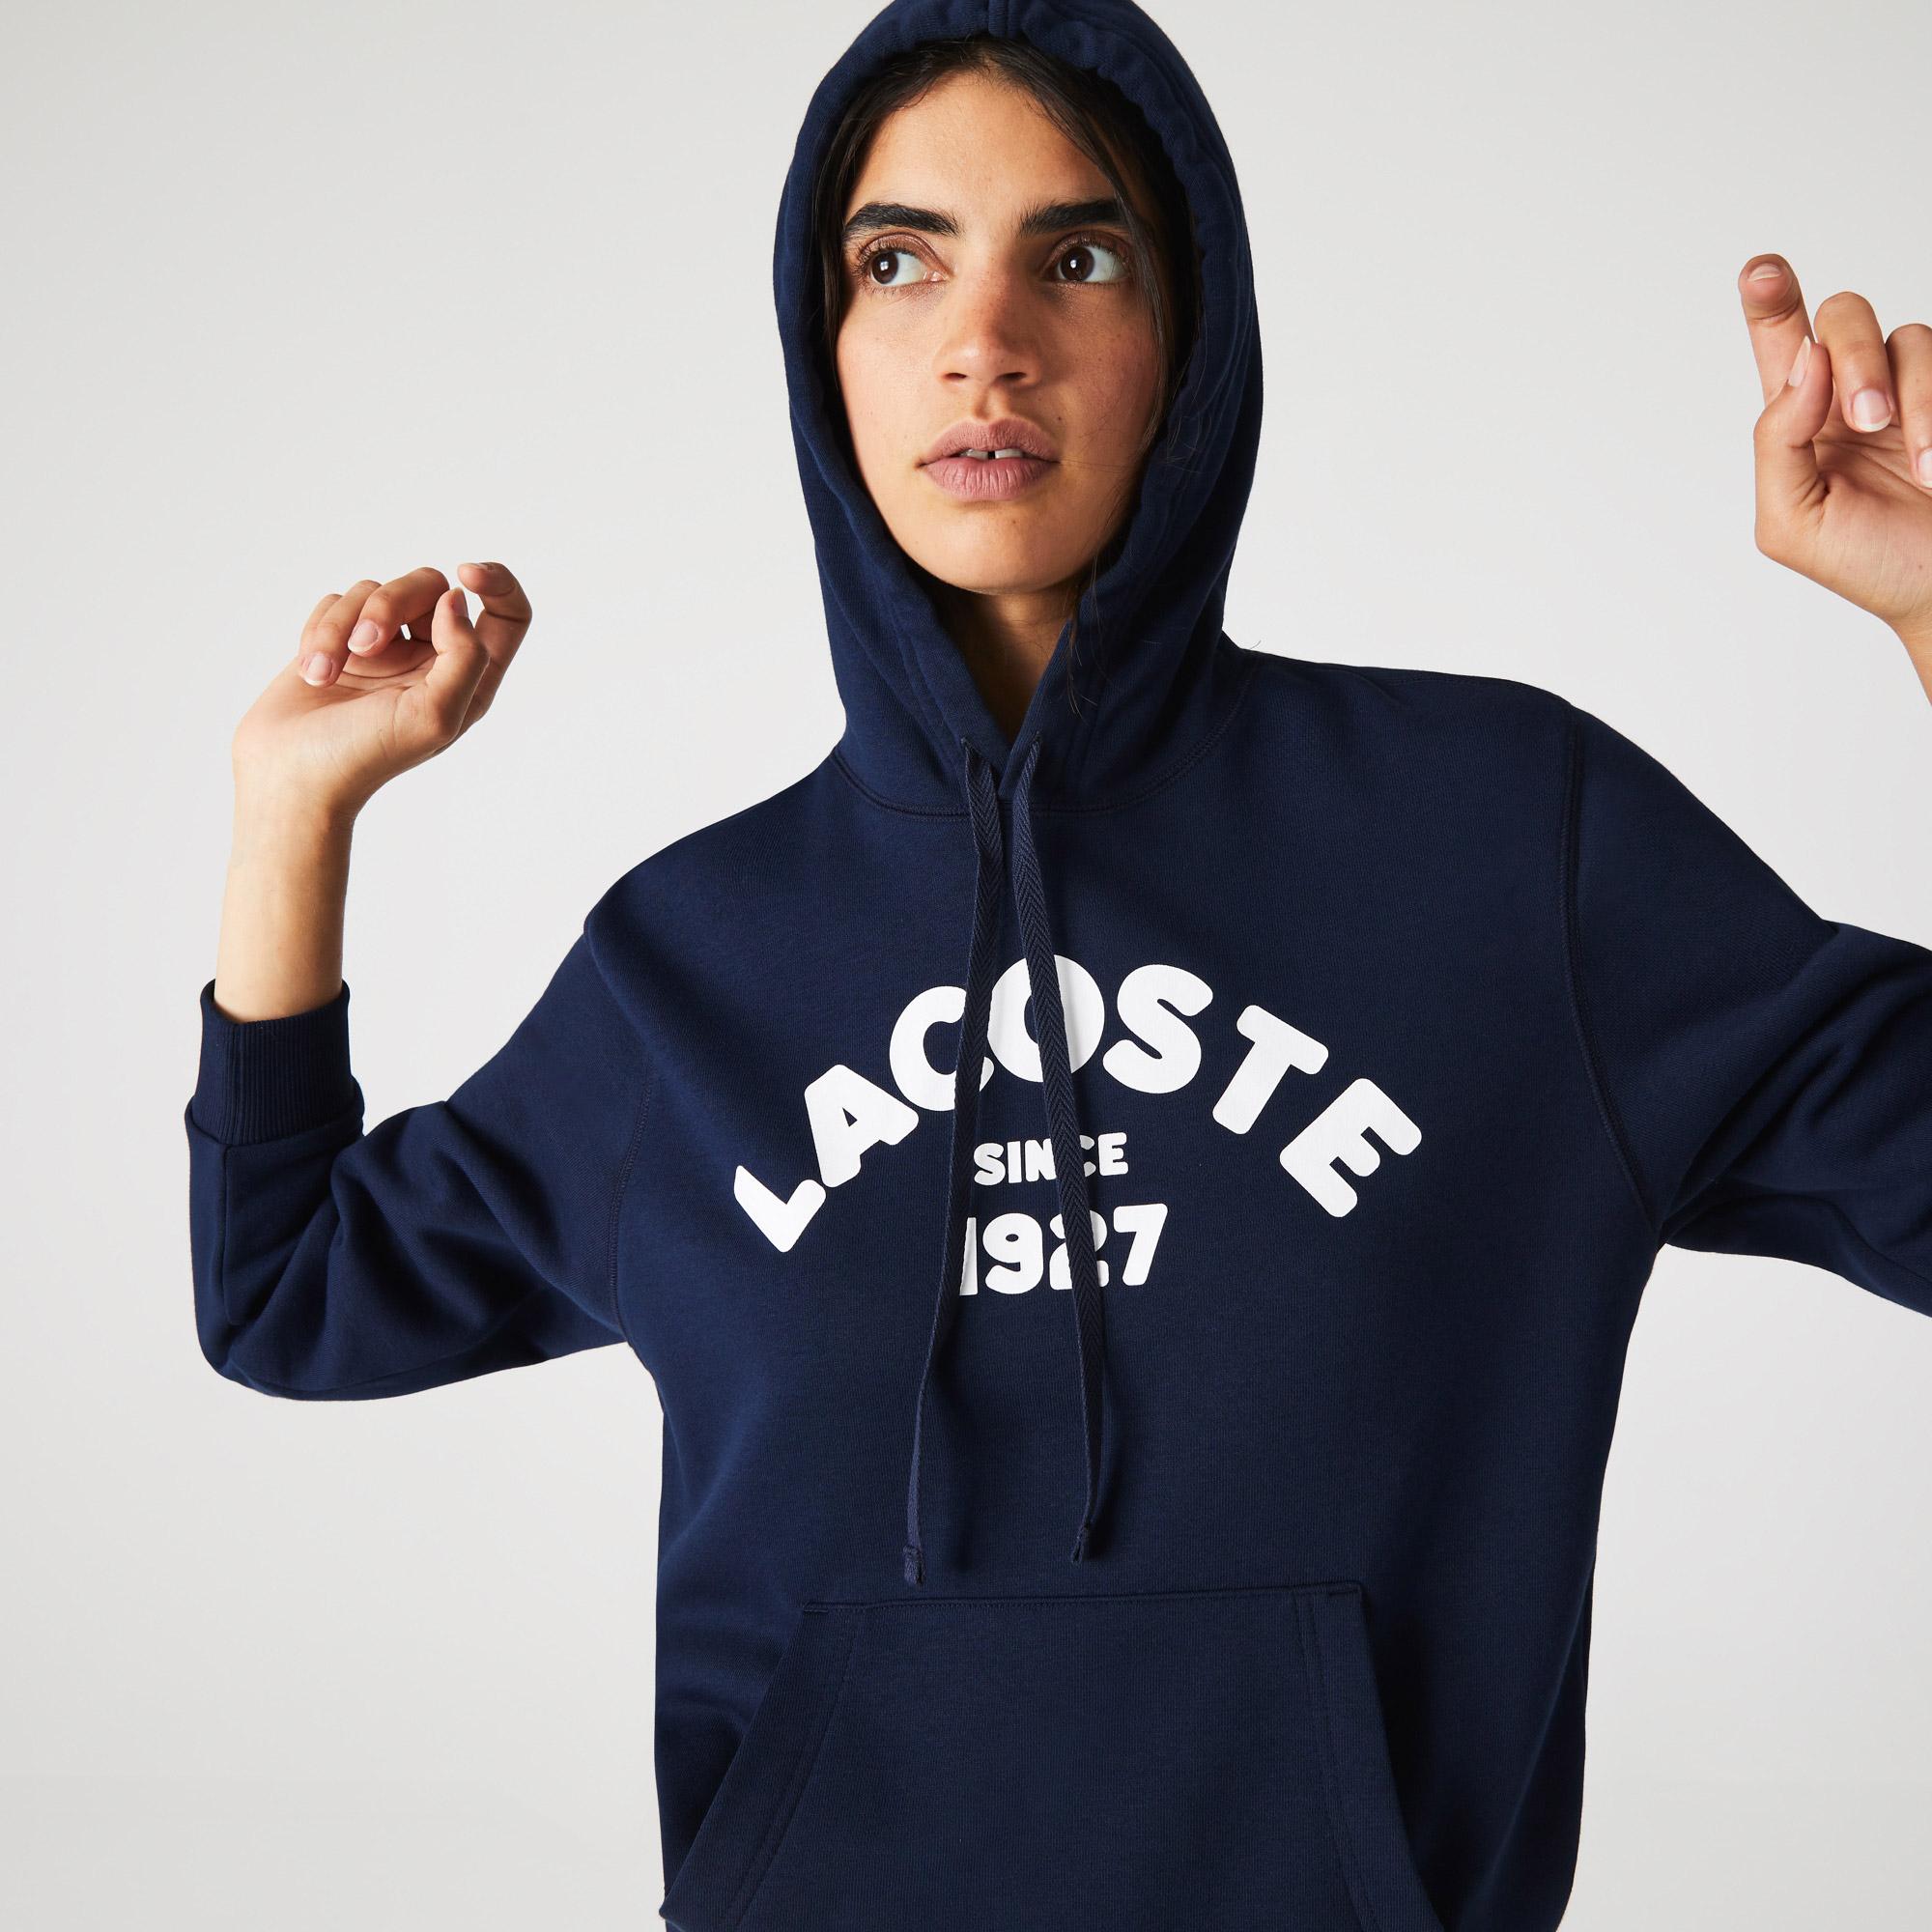 Lacoste loosewomen hoodie polar with hood, with pattern